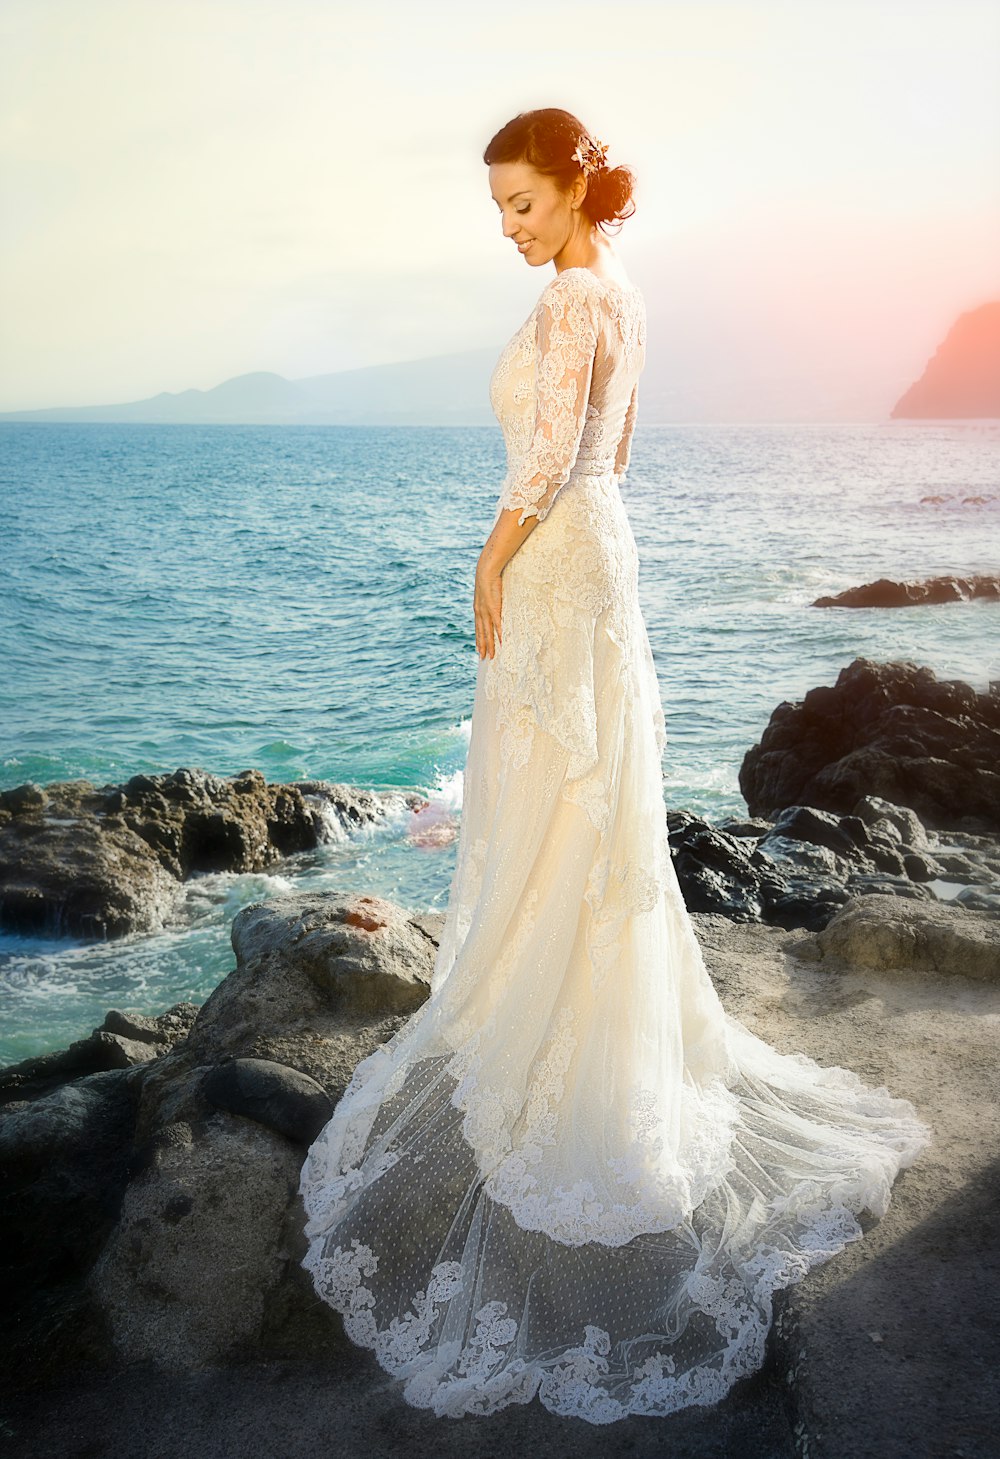 woman wearing white gown standing on rocks across body of water